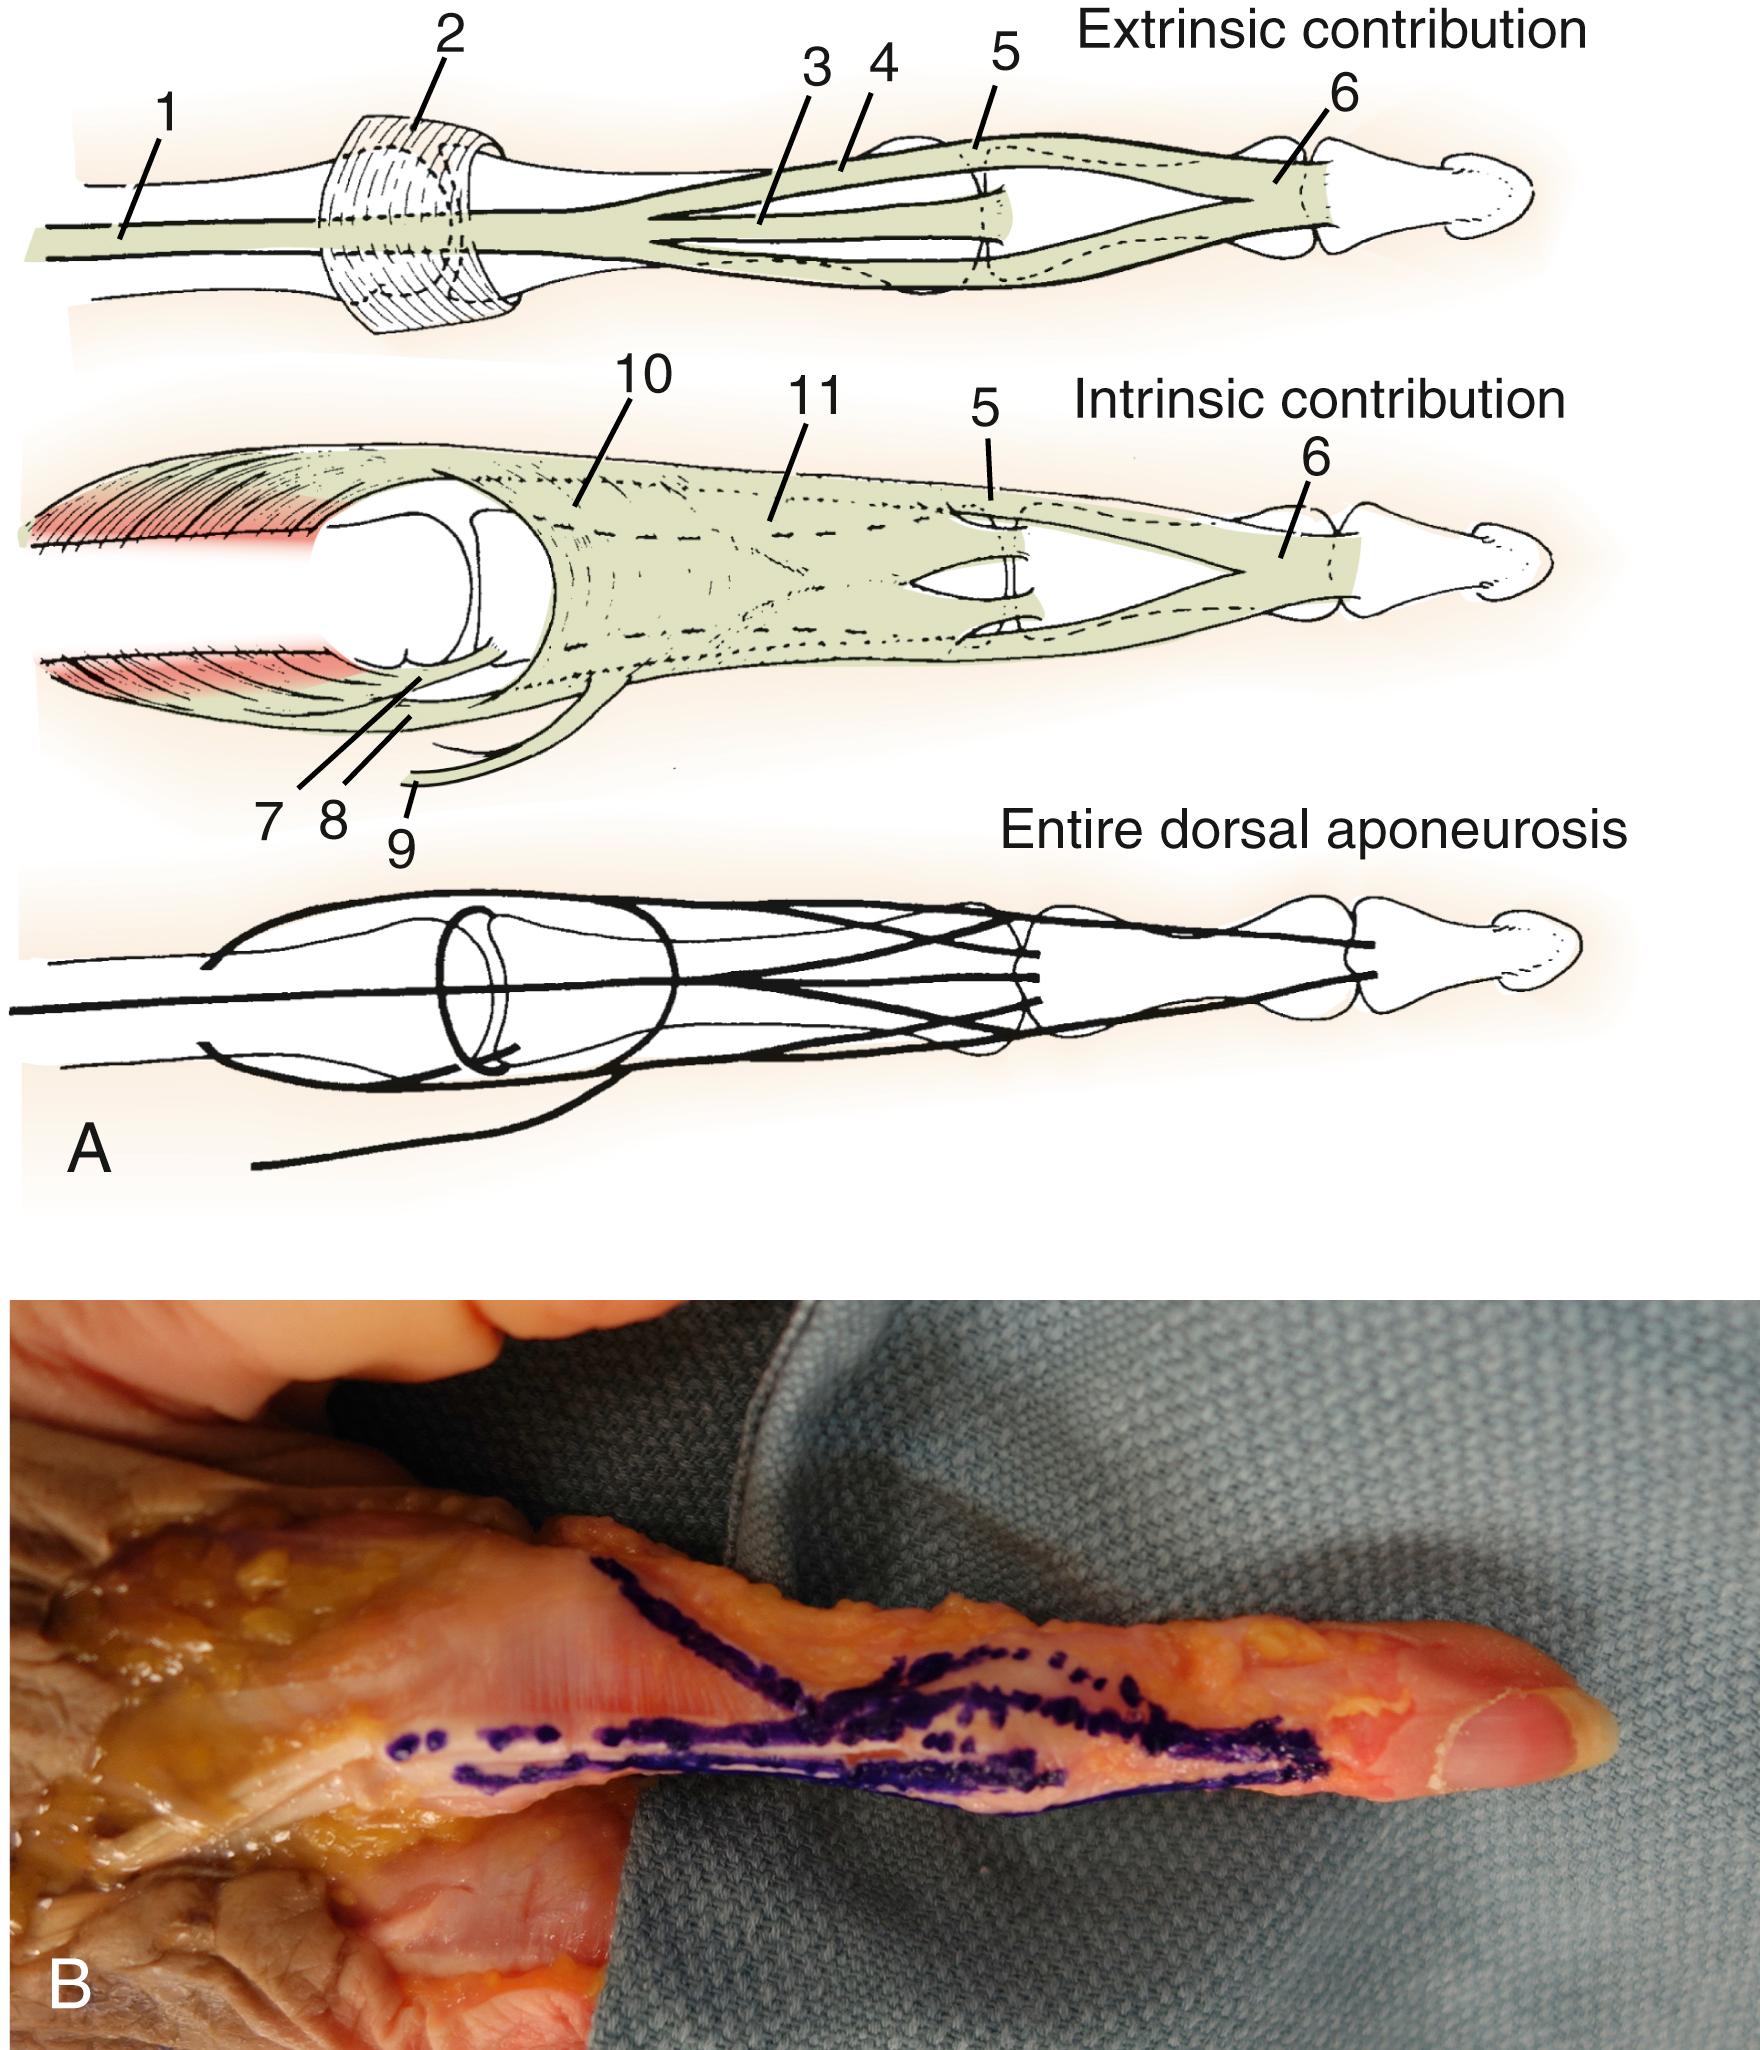 Fig. 10.6, Lateral view of the dorsal aponeurosis of the finger. A, Diagrammatic representation of the extrinsic contribution, the intrinsic contribution, and the entire dorsal aponeurosis of the finger. 1, Extensor tendon; 2, sagittal band; 3, central slip; 4, lateral slip; 5, conjoined lateral band; 6, terminal tendon; 7, superficial head and medial tendon of the dorsal interosseous; 8, deep head and lateral tendon of the dorsal interosseous; 9, lumbrical muscle and tendon; 10, transverse fibers of the dorsal aponeurosis; 11, oblique fibers of the dorsal aponeurosis. B, Dissected specimen showing the dorsal aponeurosis of the finger. The cardboard arrow points to the lateral band lying between the lateral tendon and the conjoined lateral band. The transverse and oblique fibers are dotted. The central slip, lateral slip, lateral band, and conjoined lateral band are identified by the continuous dark lines. The sagittal bands lie proximal to the dotted transverse fibers of the dorsal aponeurosis.